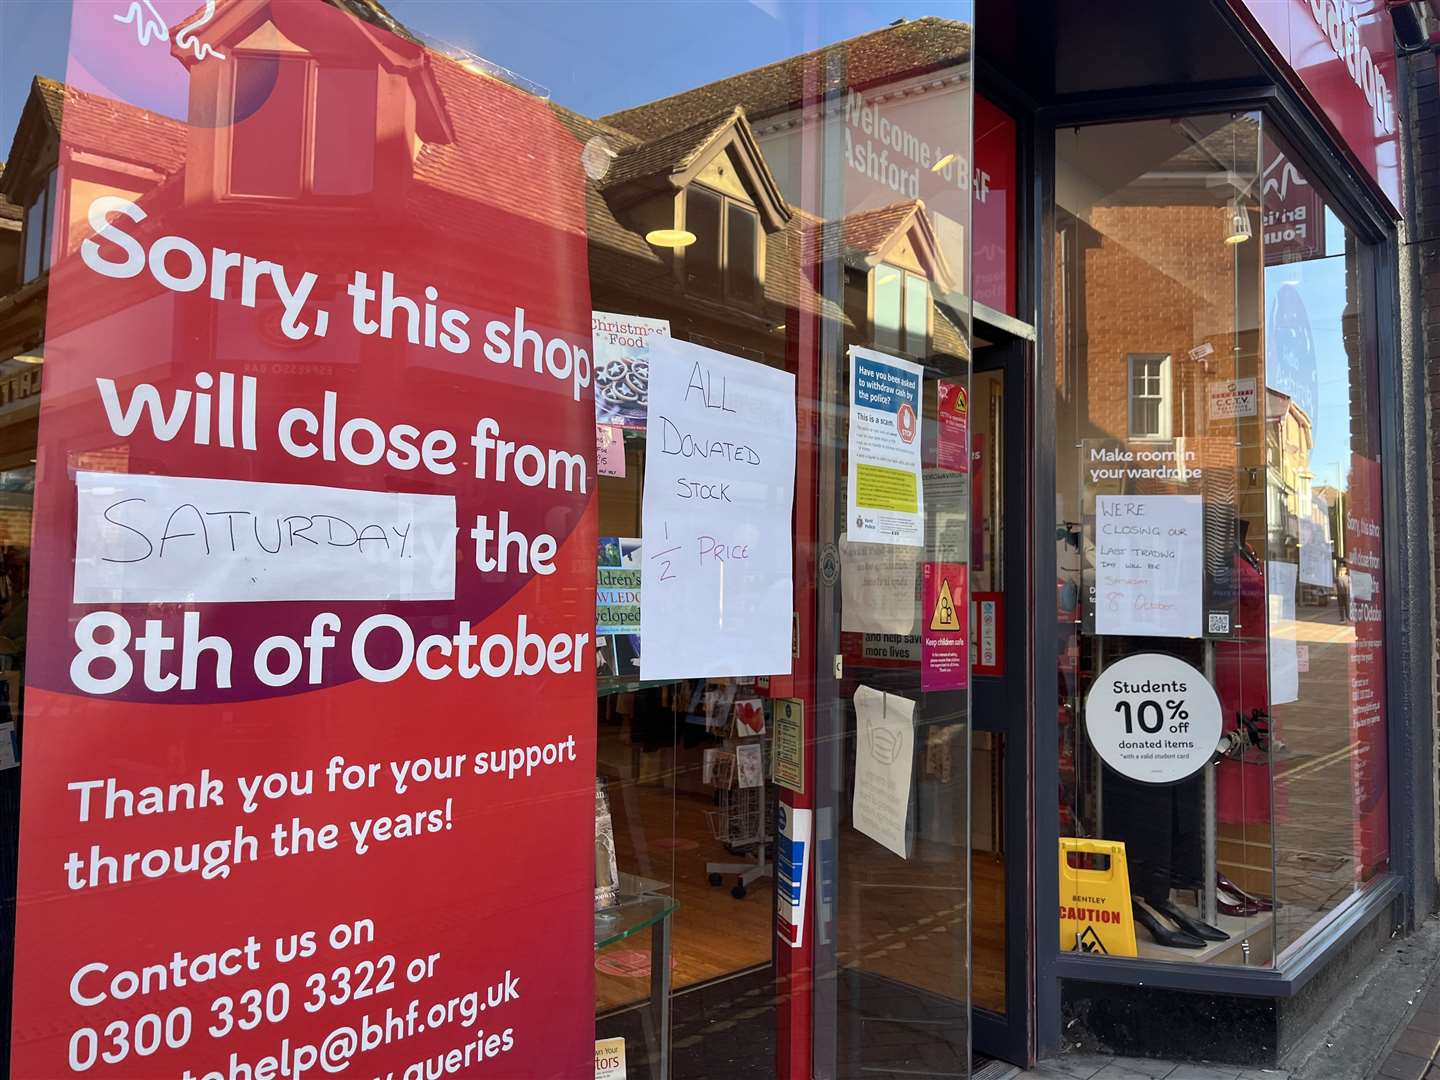 The charity shop, which has been in the town for 30 years, is closing tomorrow (October 8)